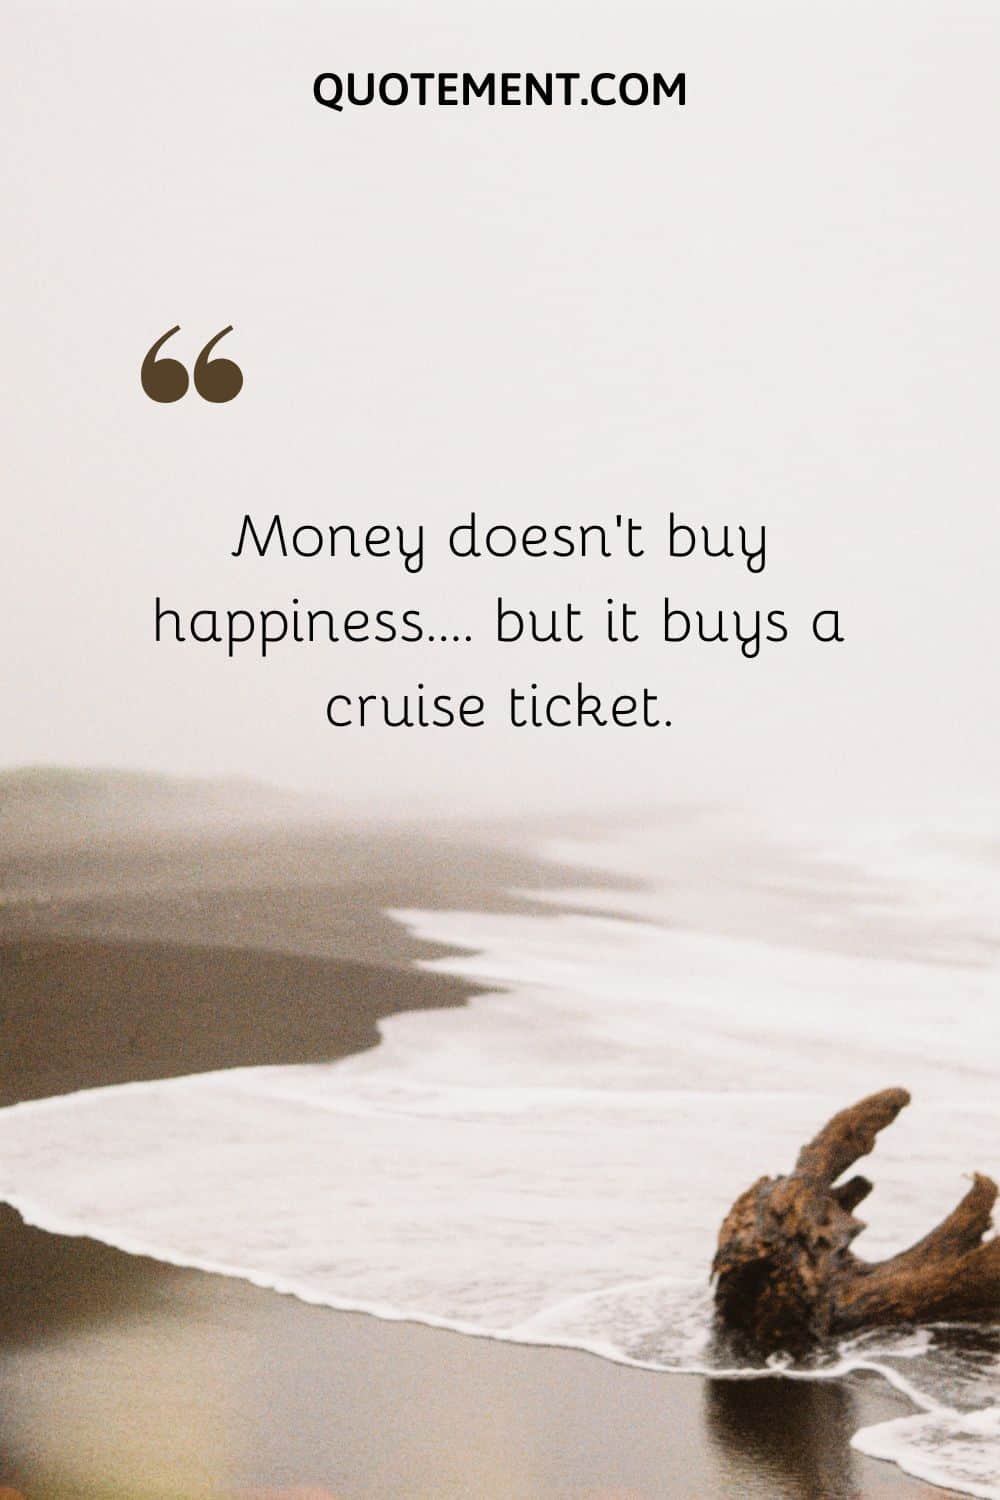 Money doesn’t buy happiness…. but it buys a cruise ticket